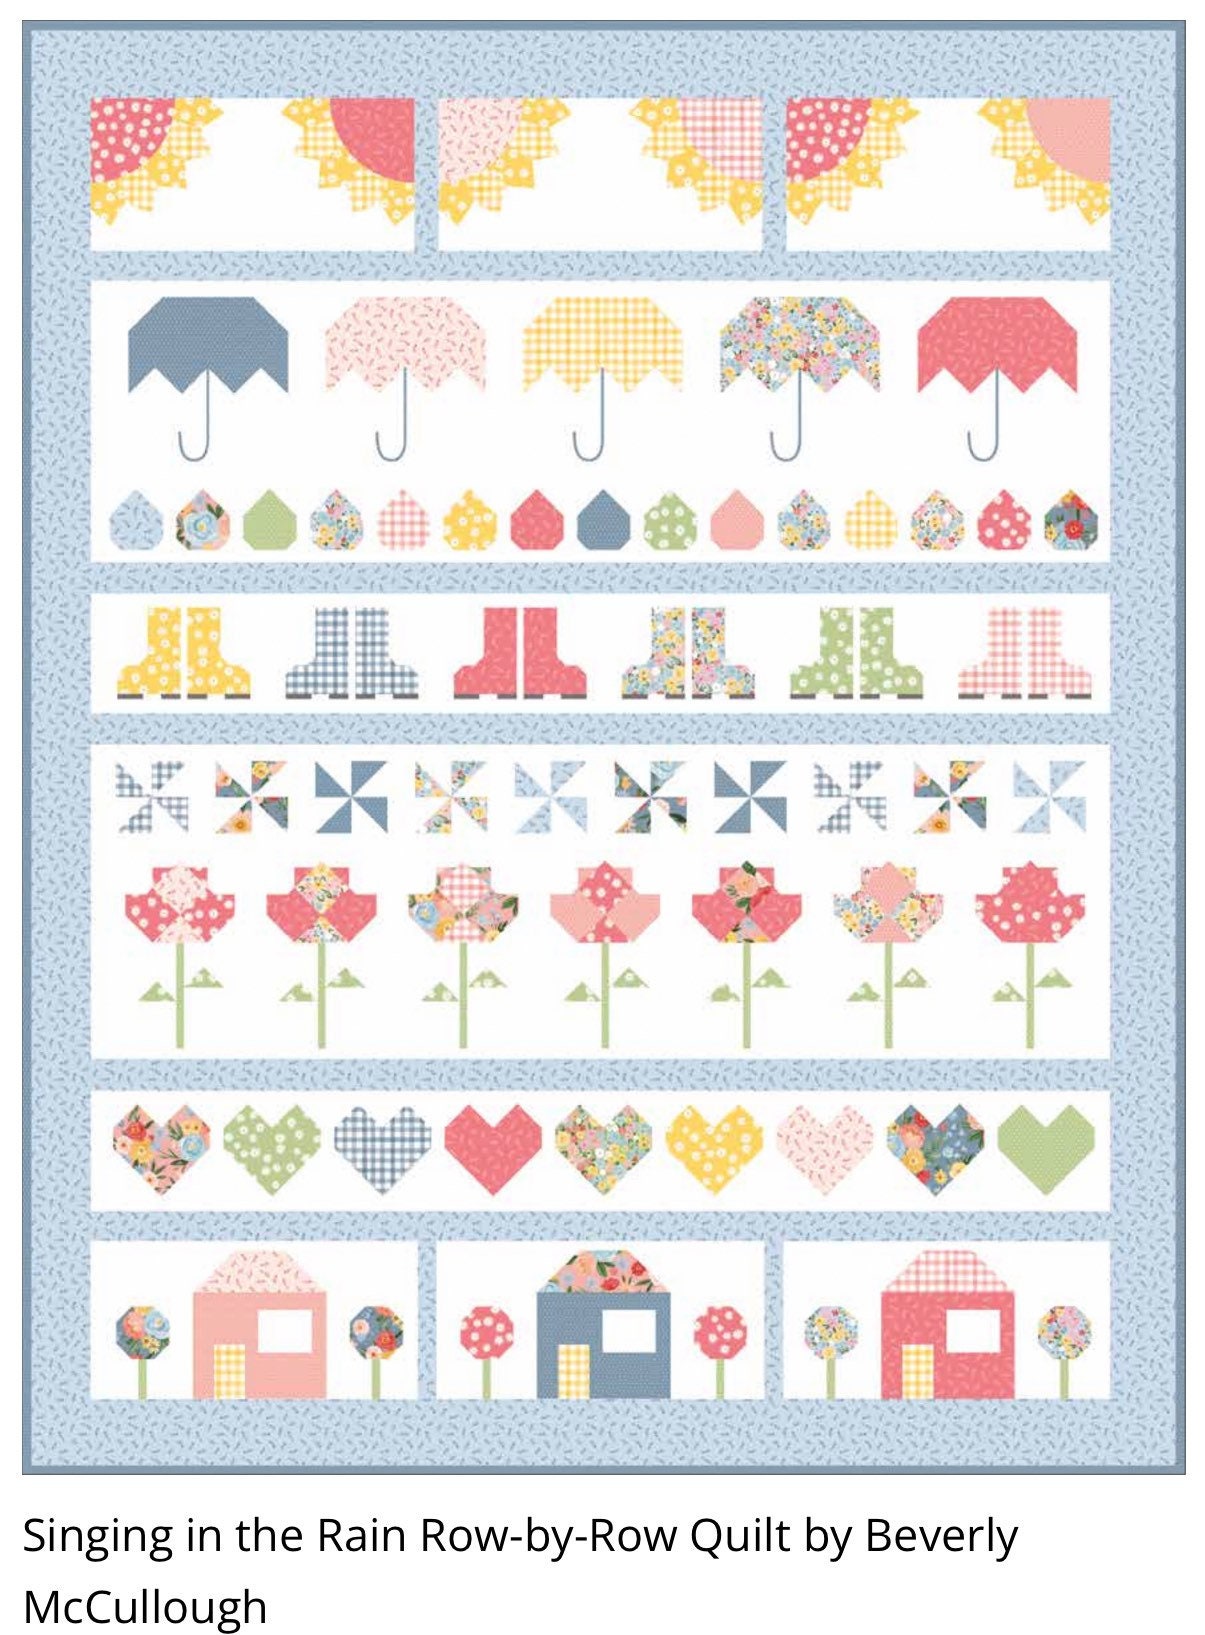 Flower Garden by Echo Park Paper Company: Charm Pack – Modern